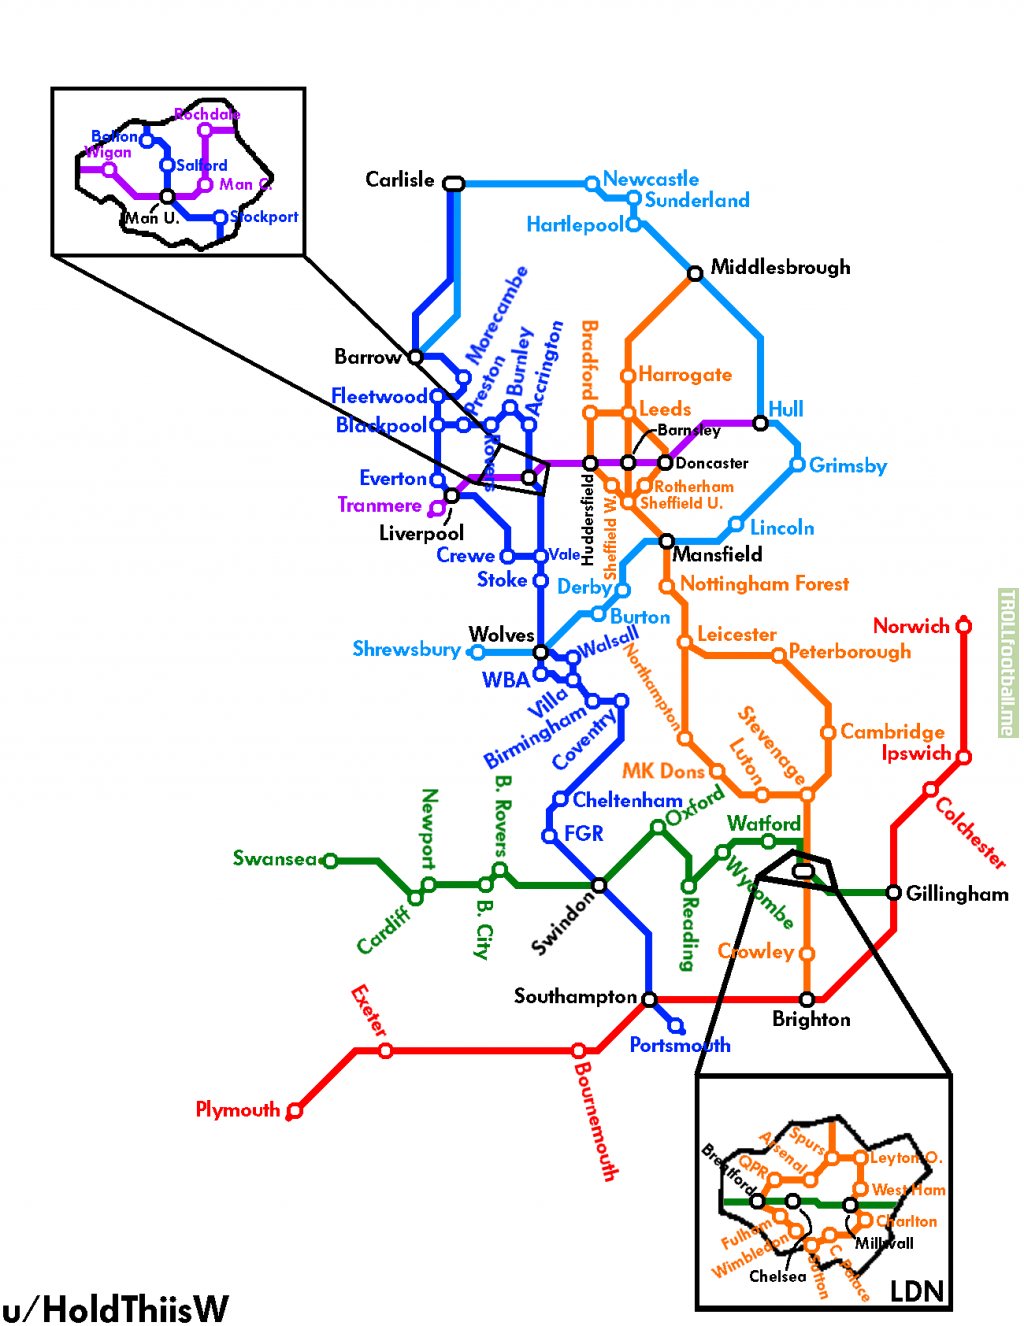 If every club in the 92 (England's Top 4 Divisions) was connected by a country-wide subway system [OC}